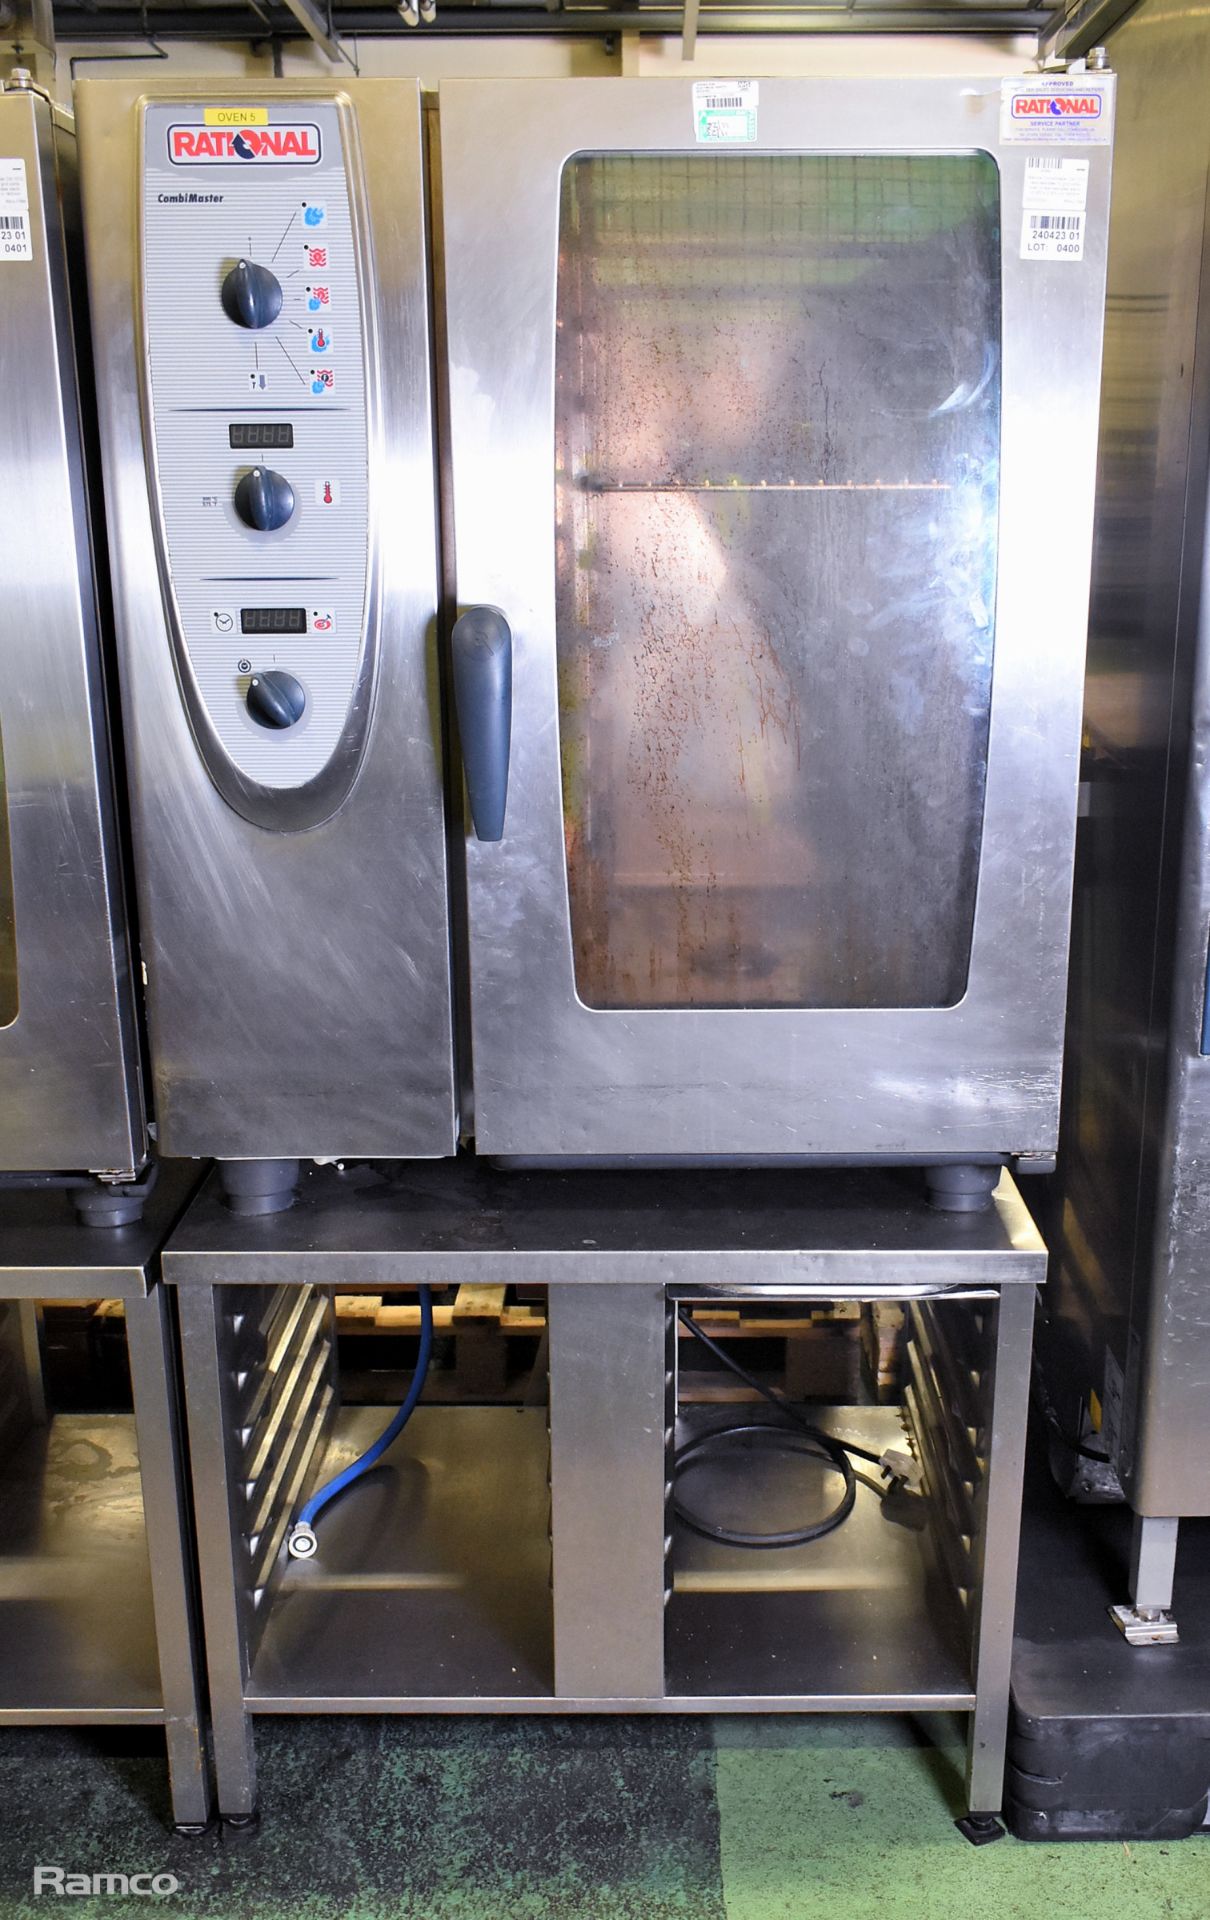 Rational CombiMaster CM 101G stainless steel 10 grid combi oven on stainless steel stand